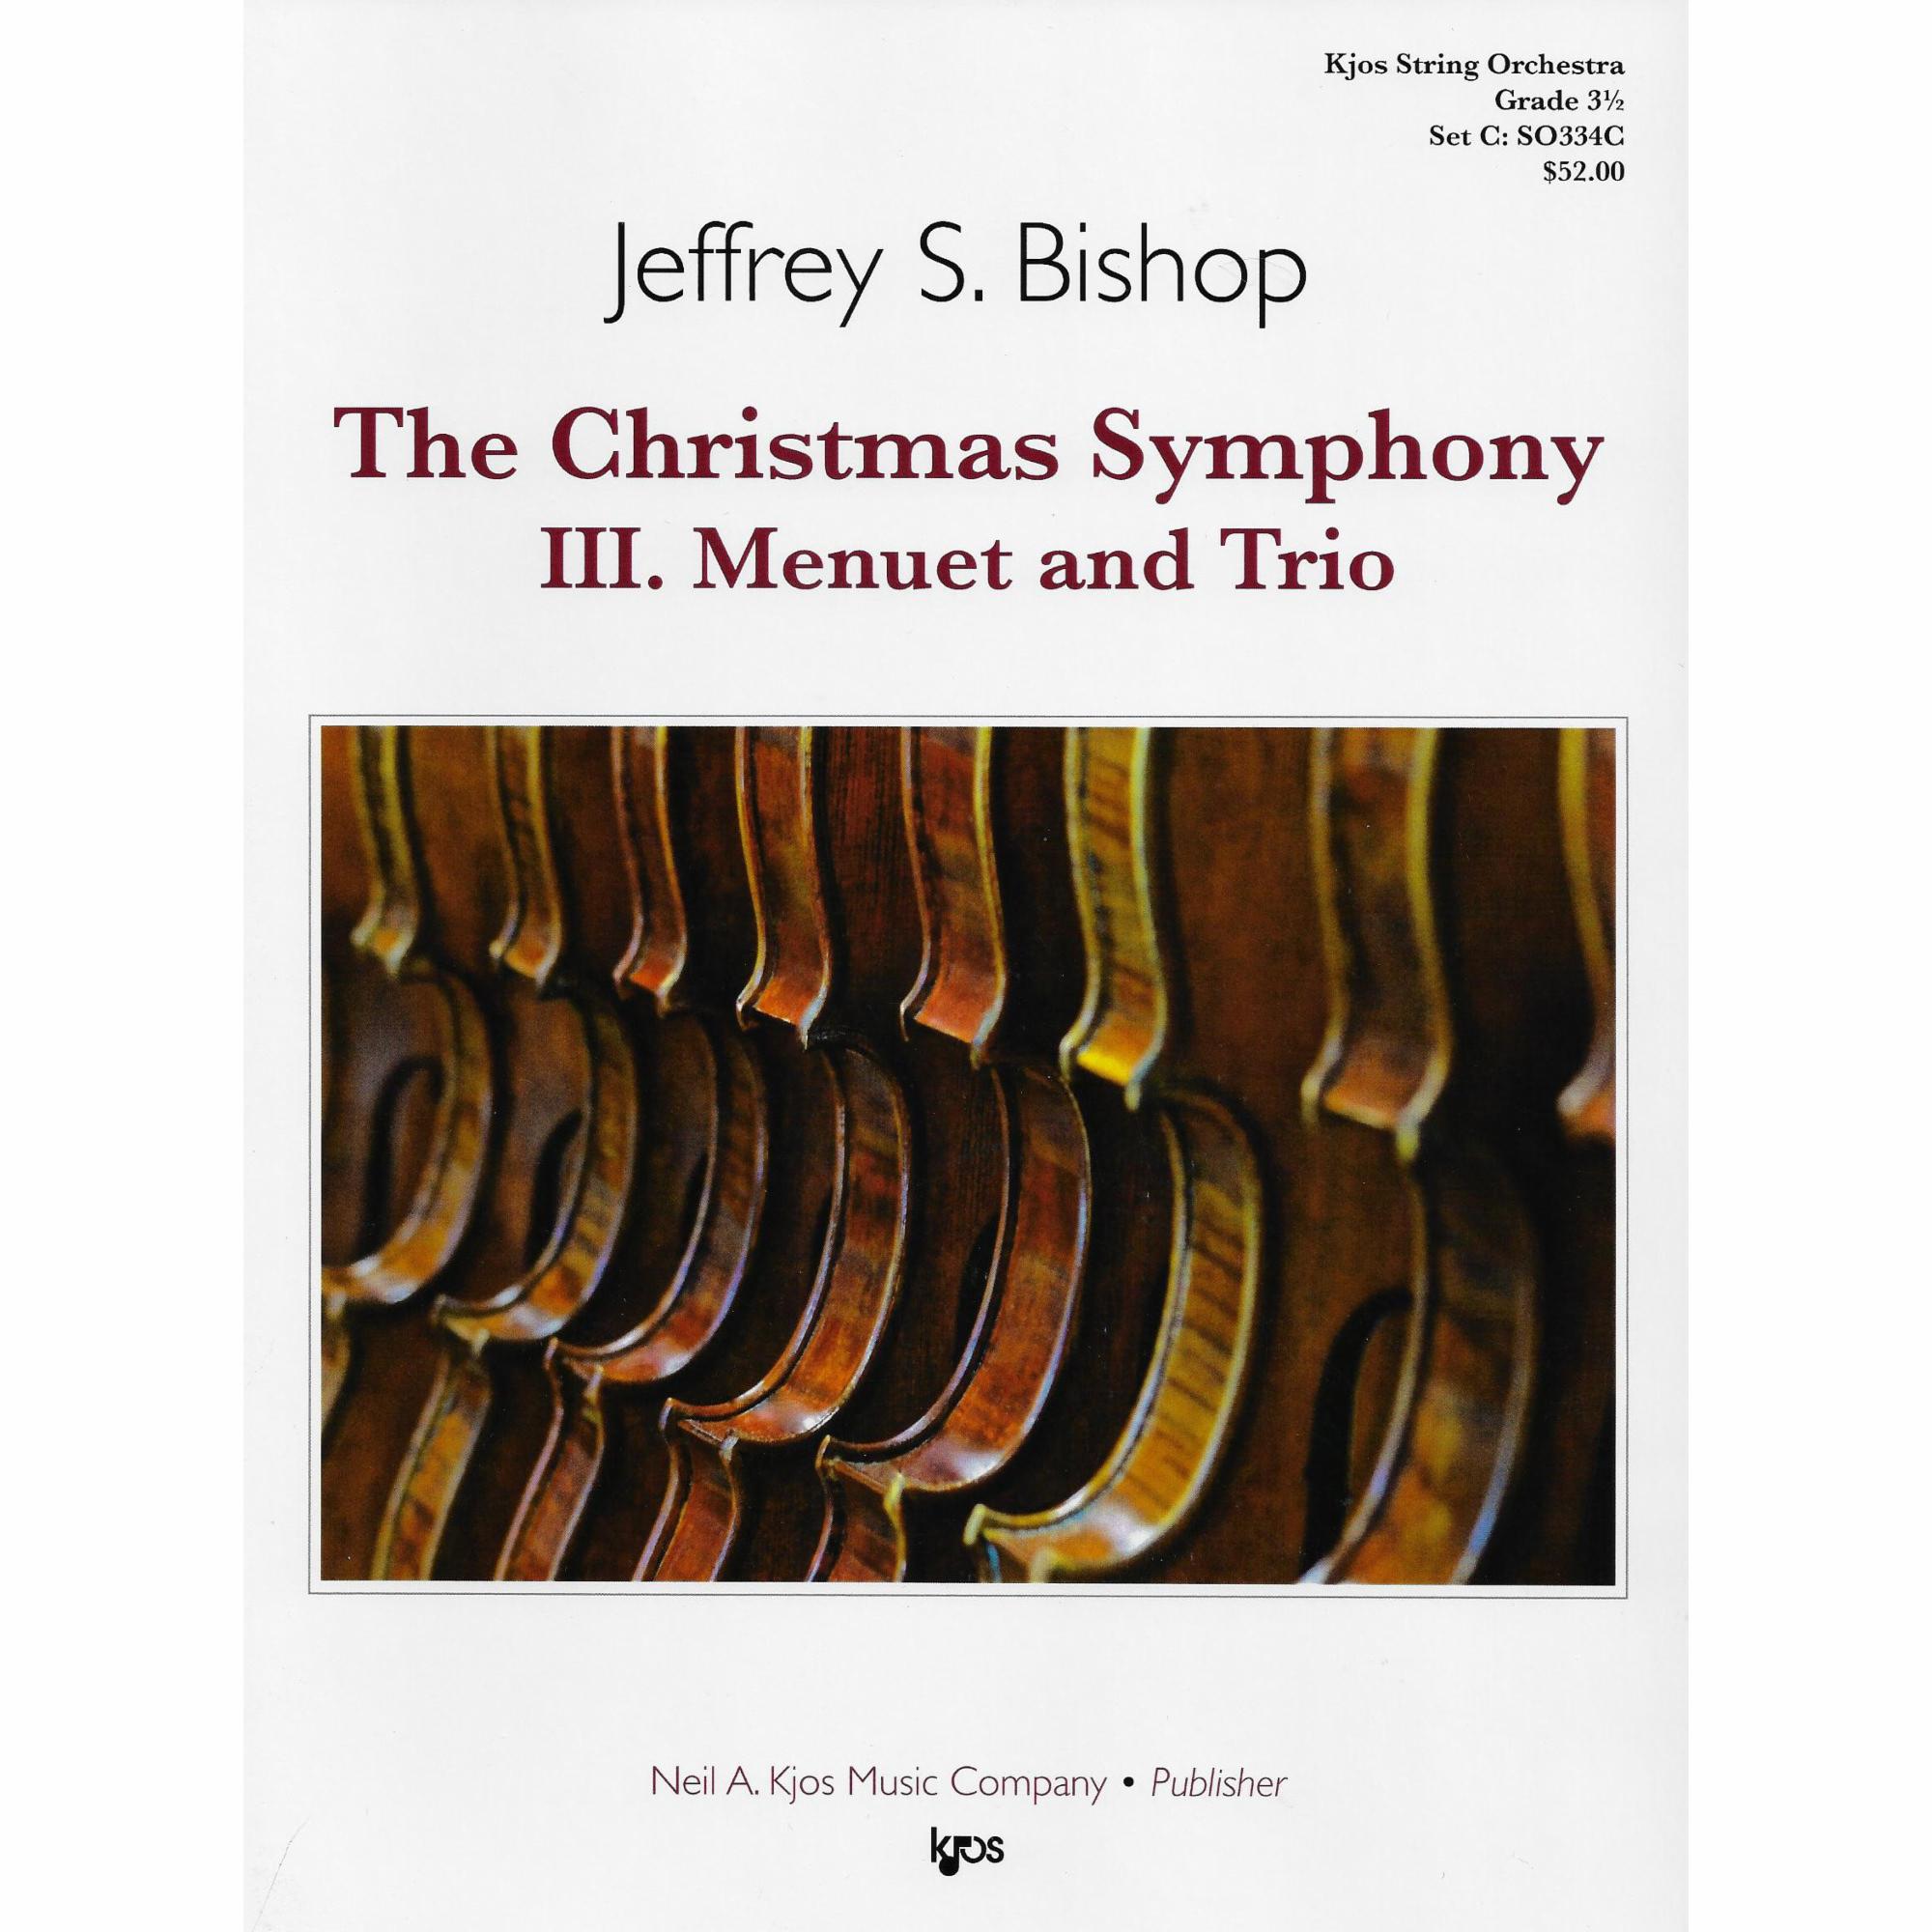 The Christmas Symphony: III. Menuet and Trio for String Orchestra